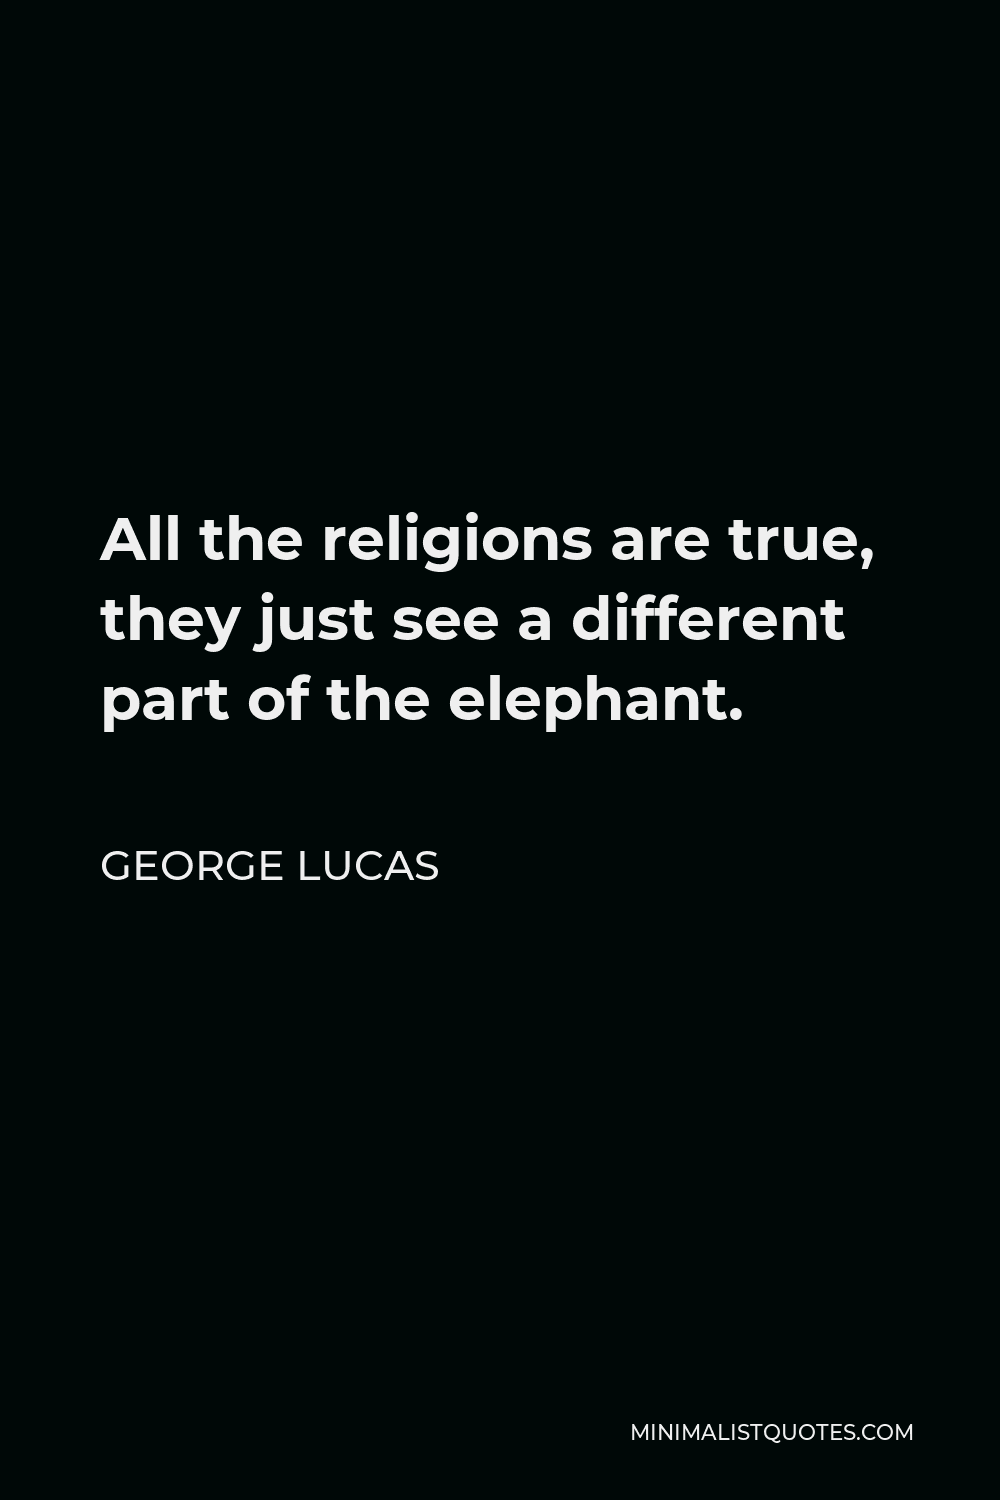 George Lucas Quote - All the religions are true, they just see a different part of the elephant.